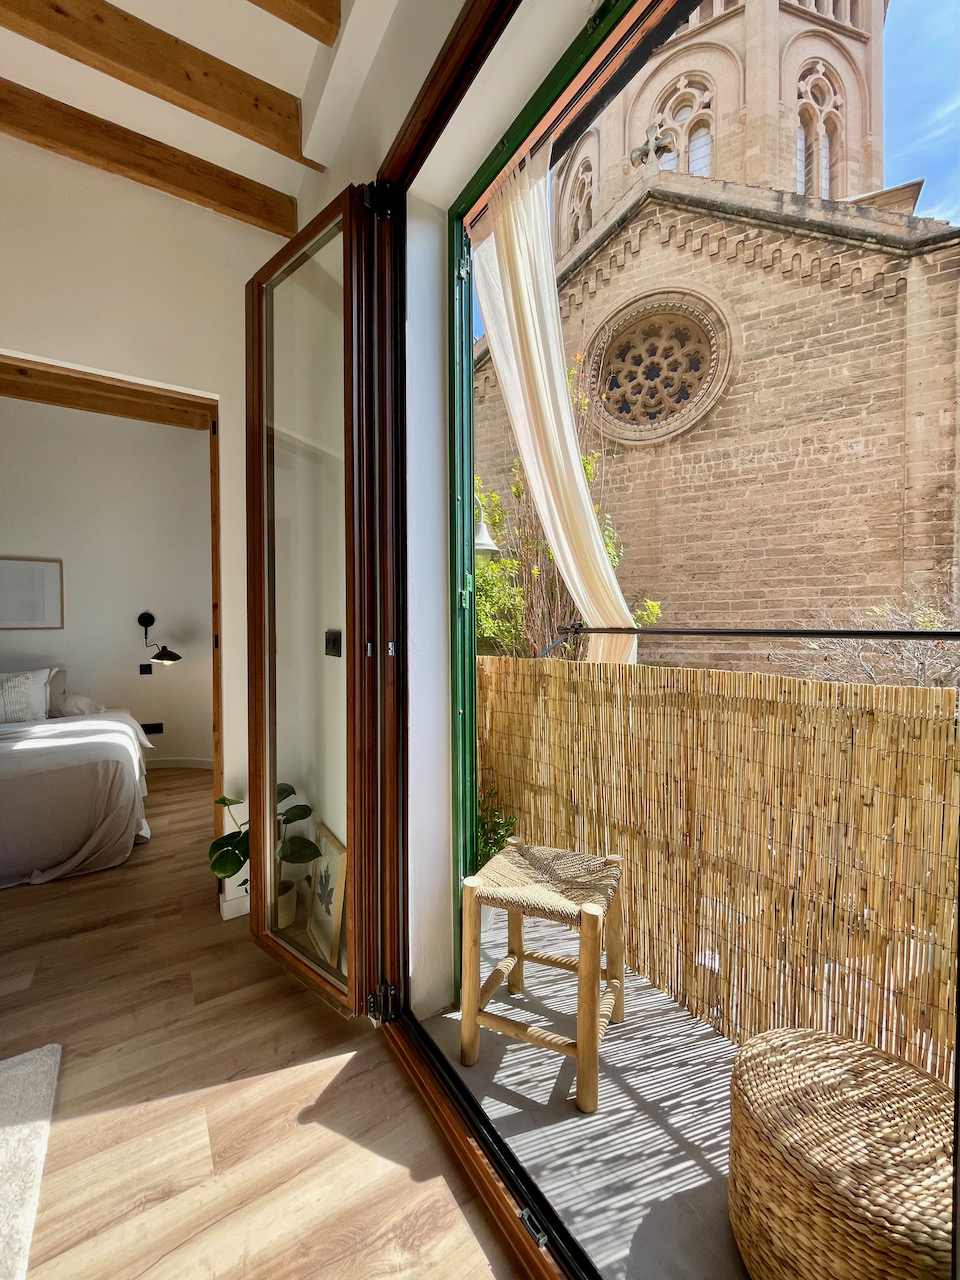 Charming flat in Santa Catalina, refurbished, sunny and with views to the church.